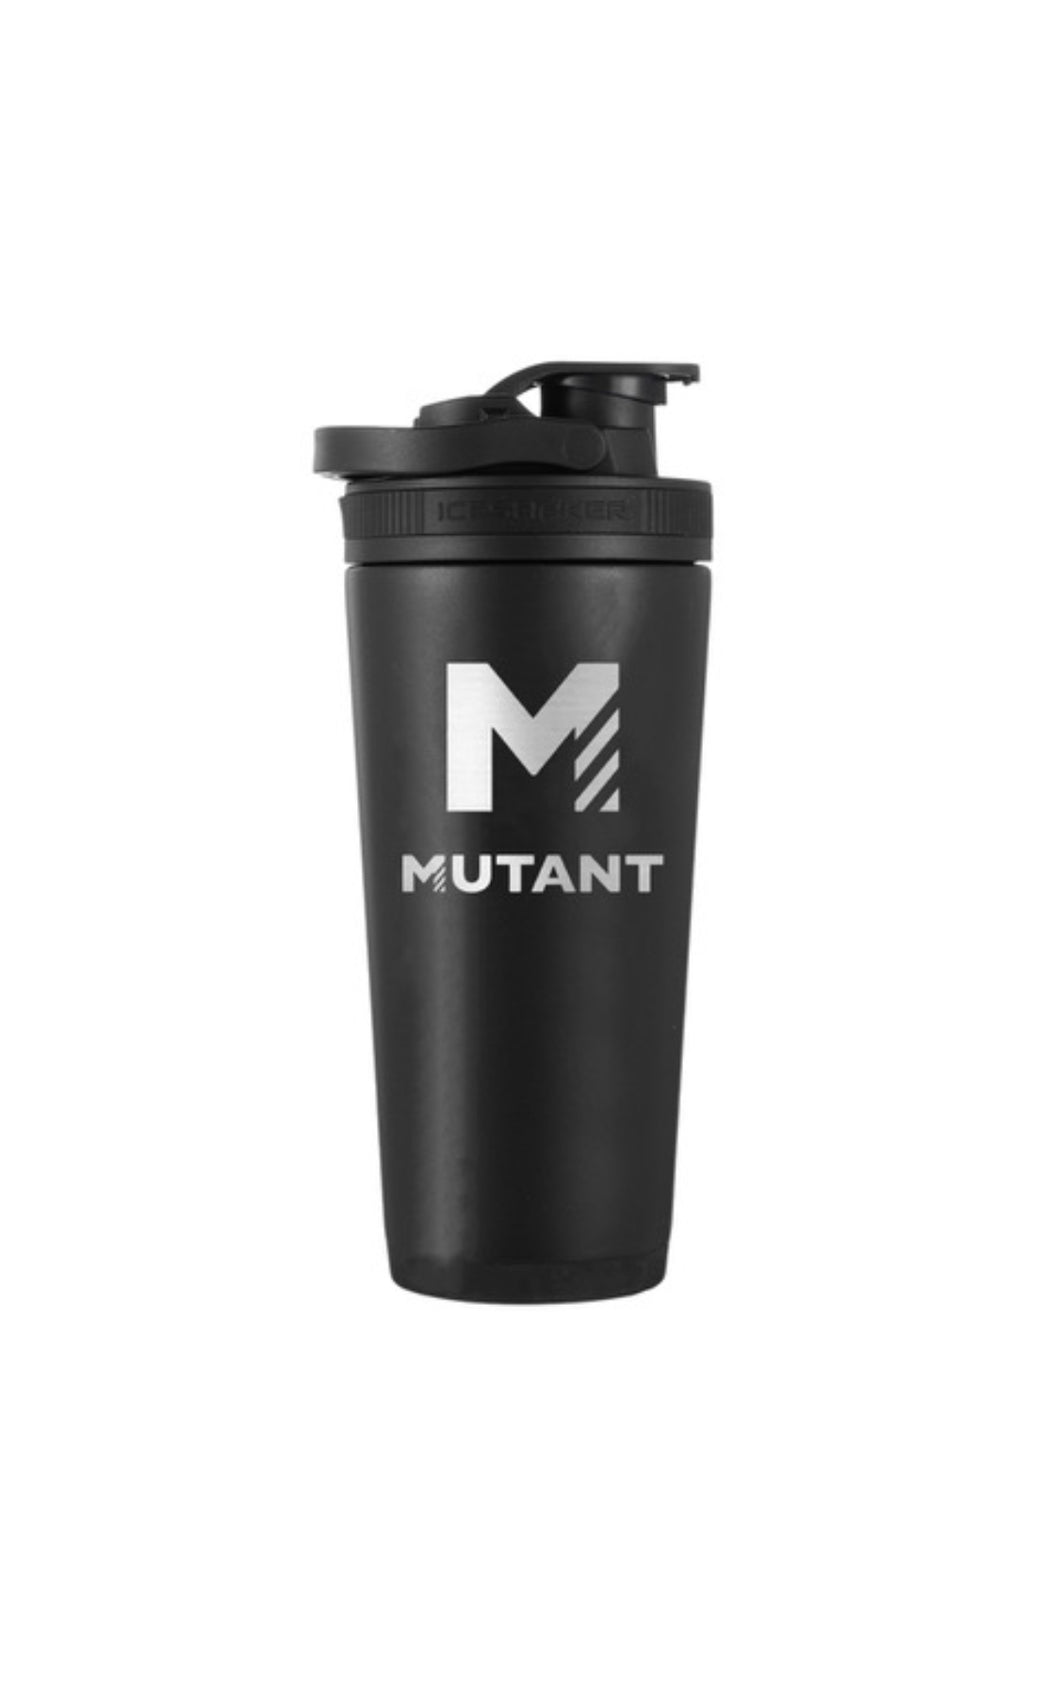 #5**New**Black Mutant Ice Shaker Cup